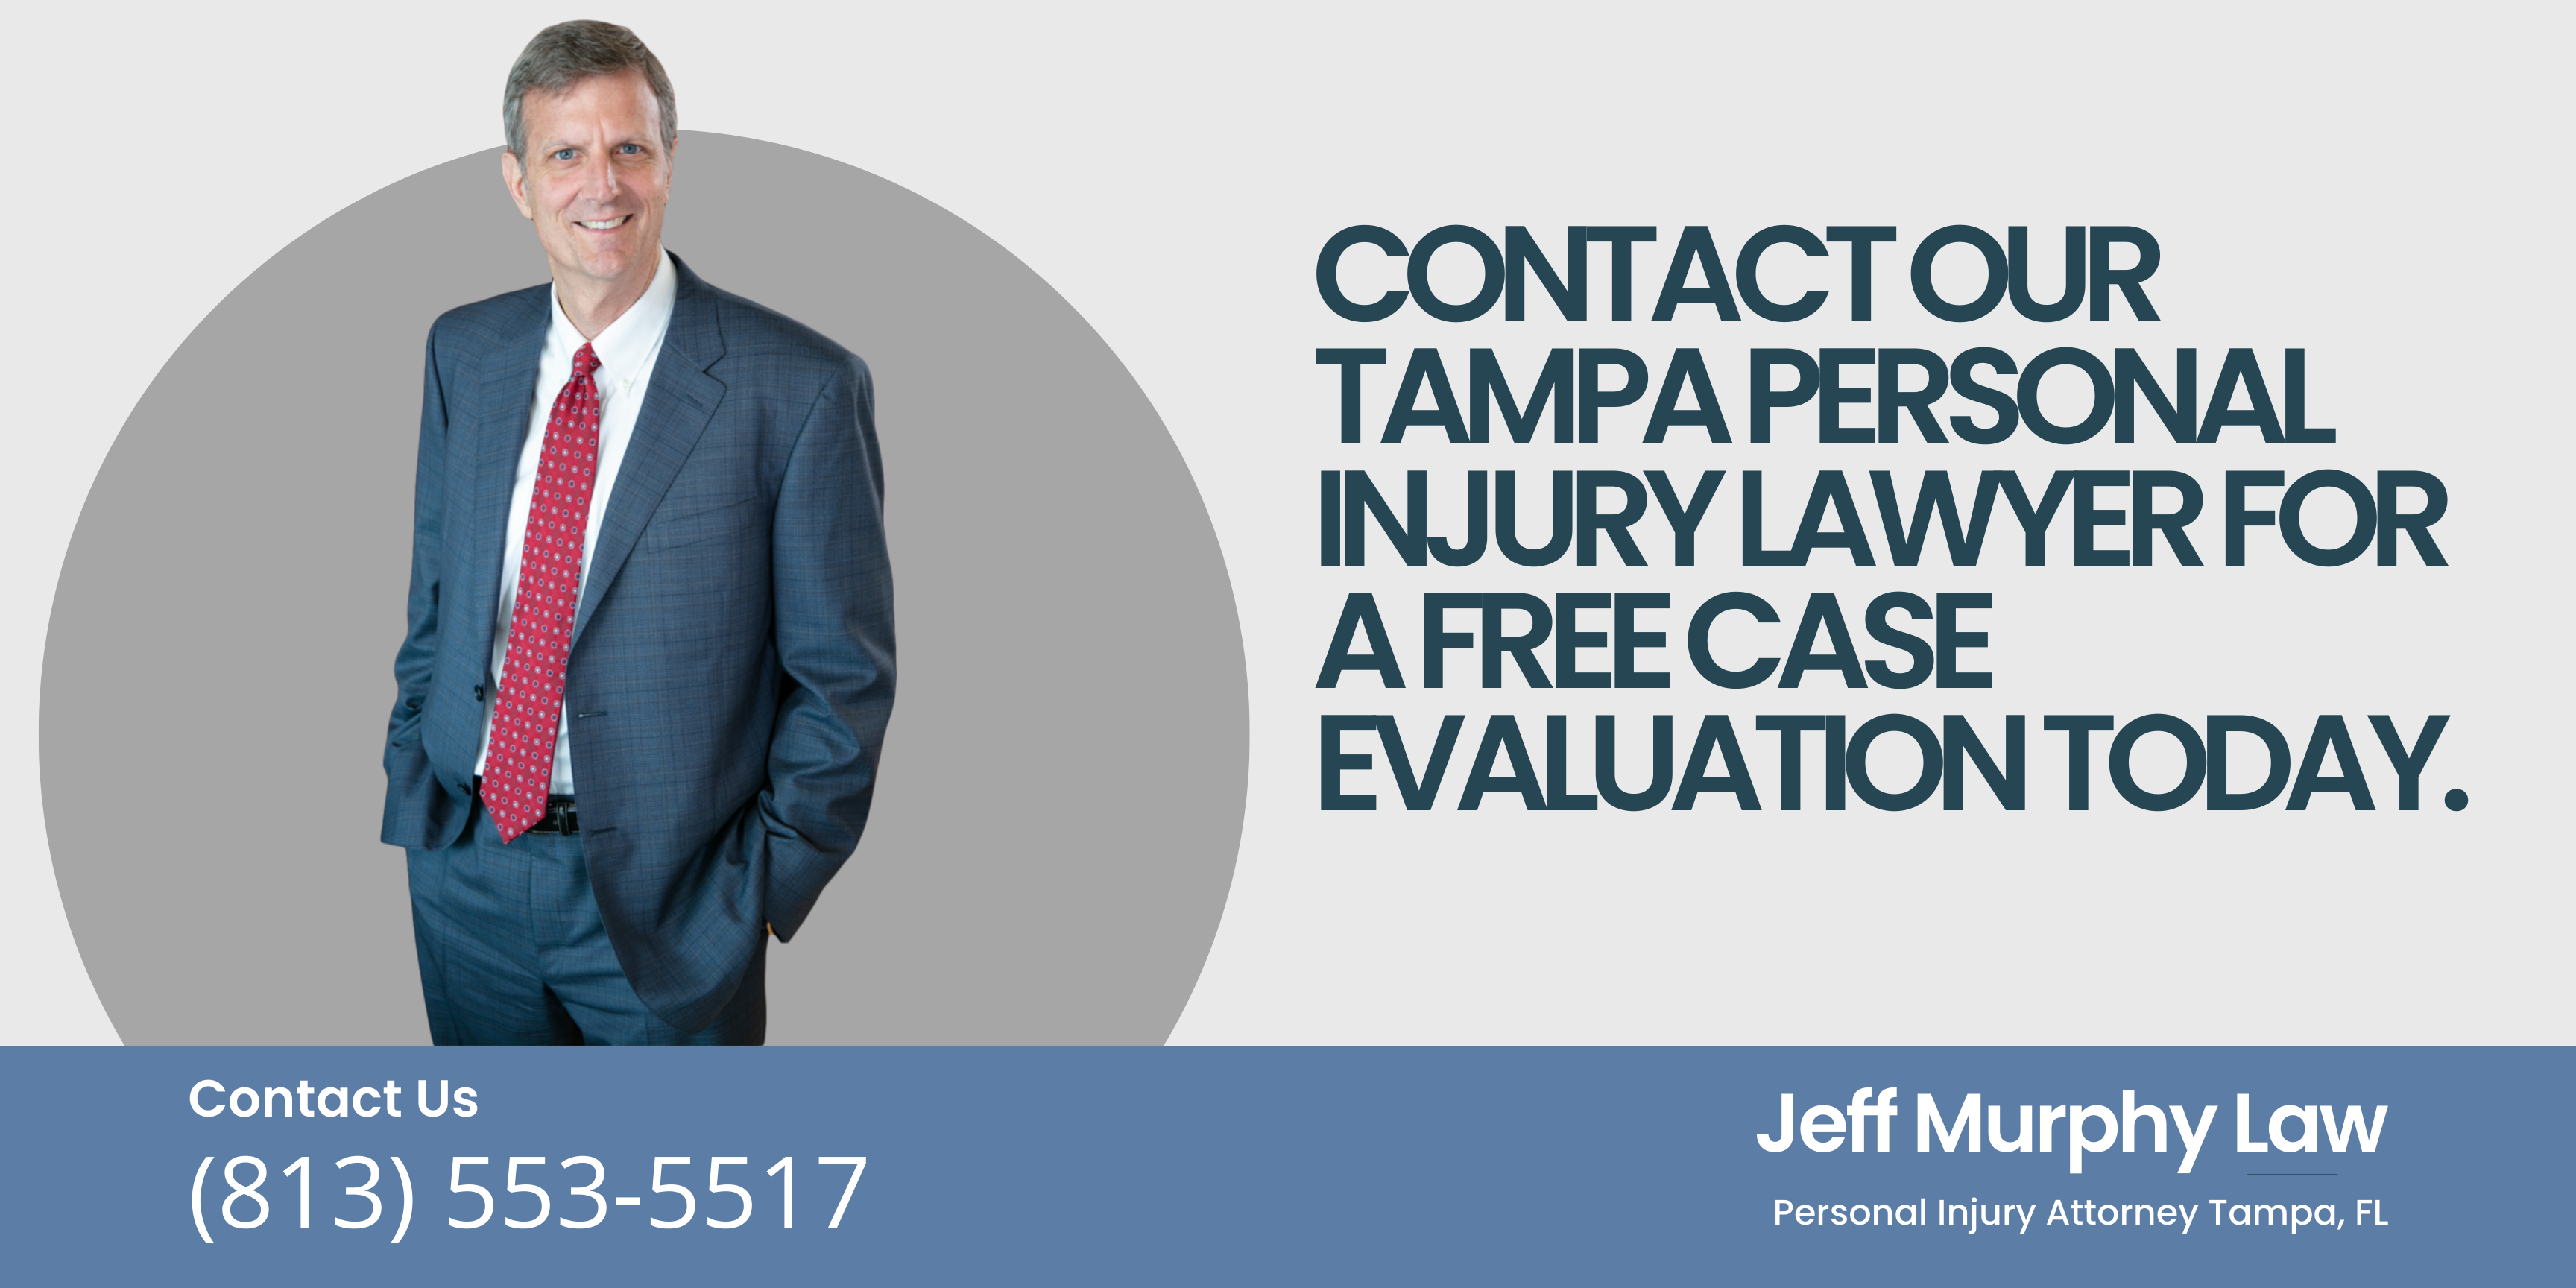 Contact our Tampa Personal Injury Lawyer